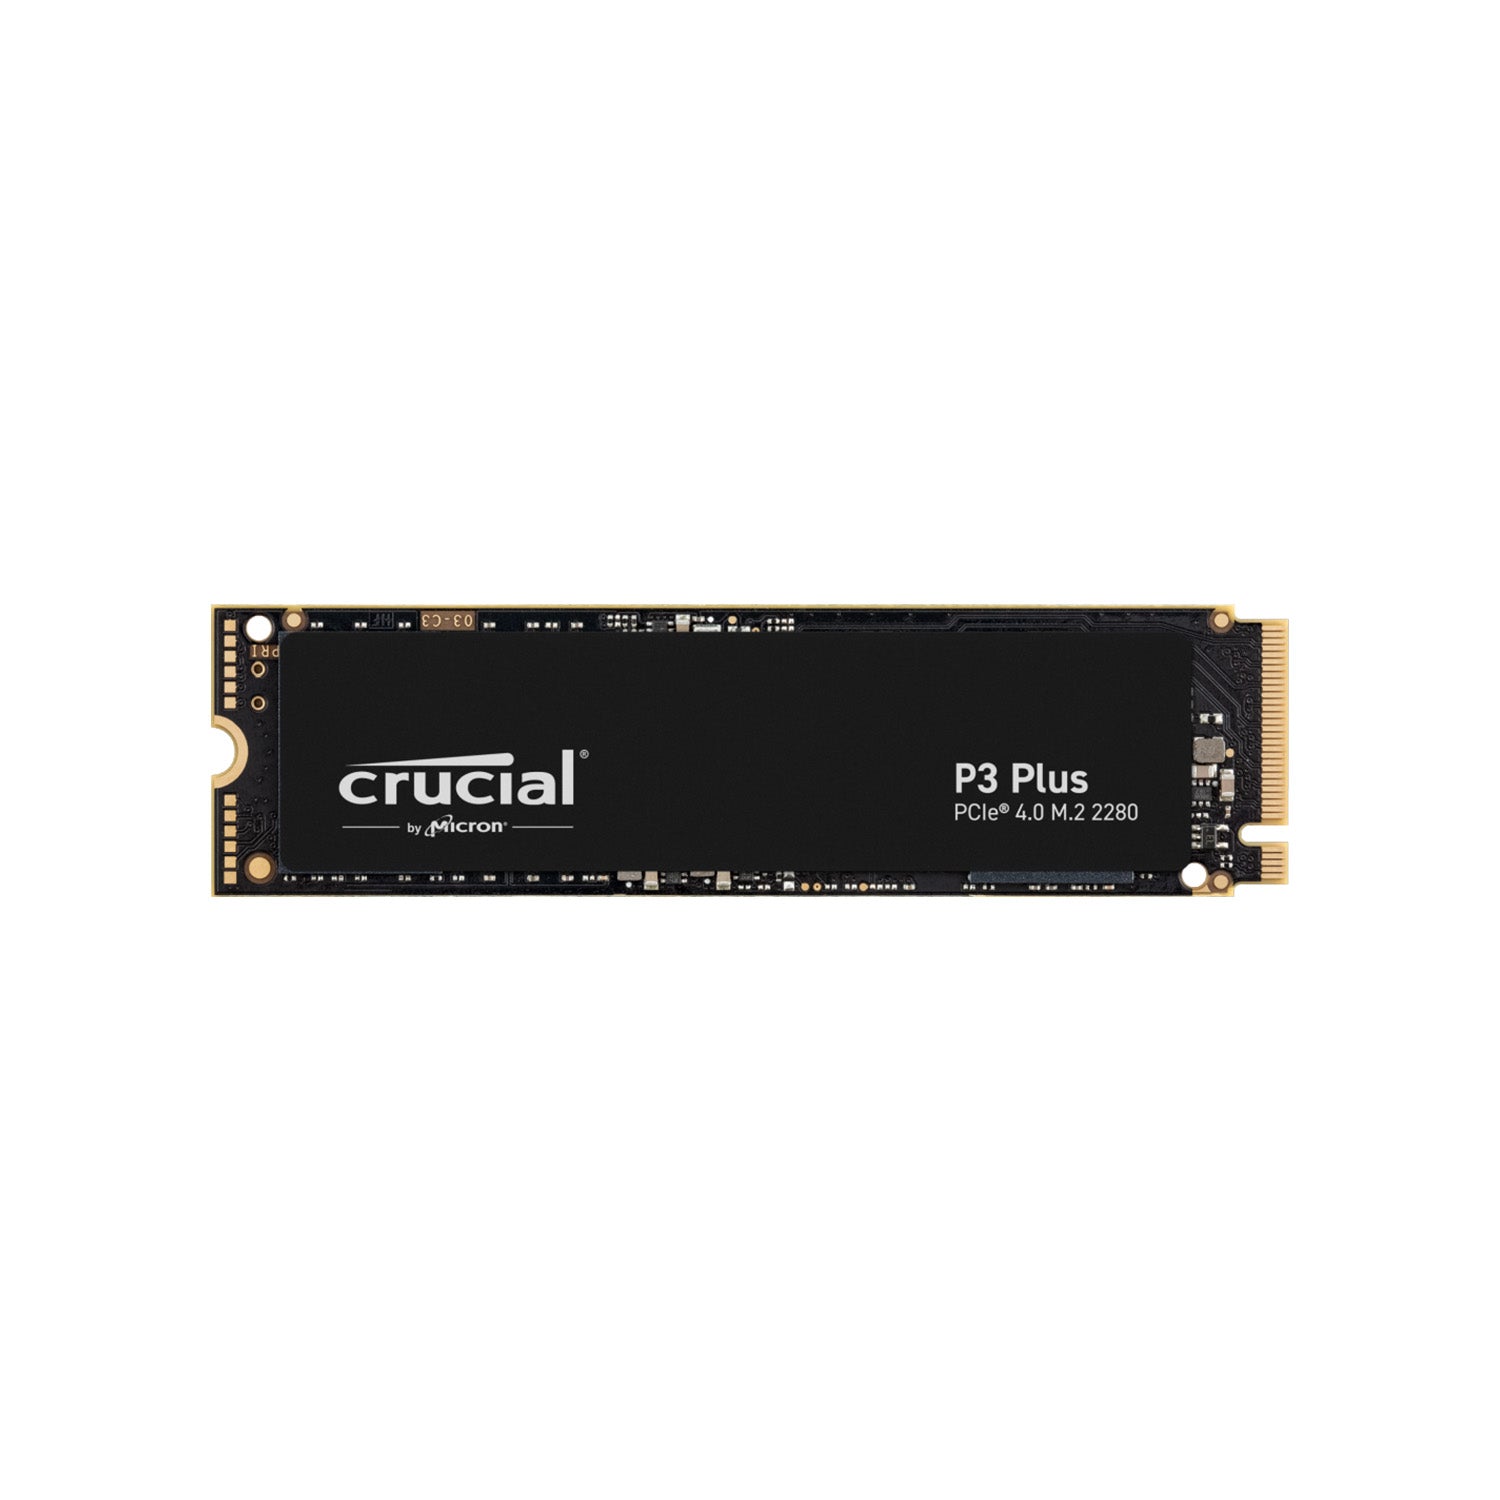 Crucial P3 Plus 2TB Solid State Drive PCIe 4.0 3D NAND NVMe M.2 SSD - High-Performance Storage up to 5000MB/s Desktop and Laptop - (CT2000P3PSSD8)